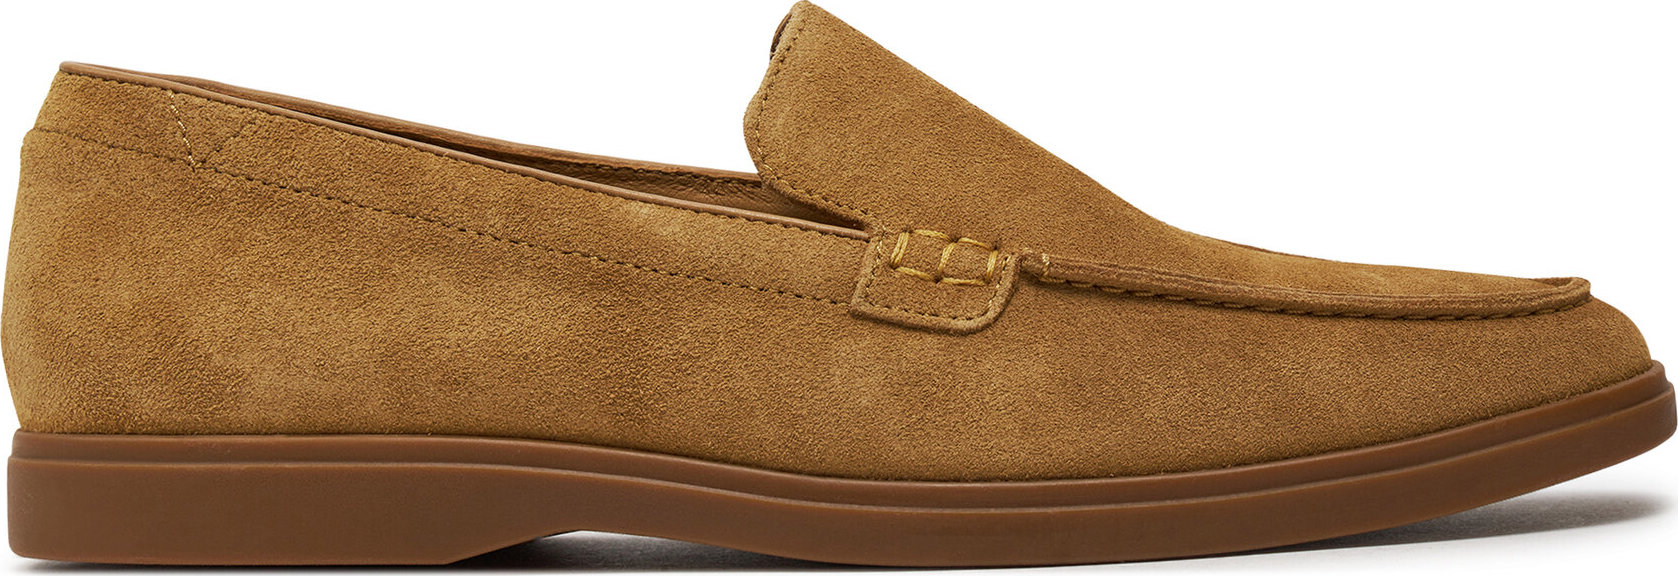 Polobotky Clarks Torford Easy 26176201 Light Tan Suede